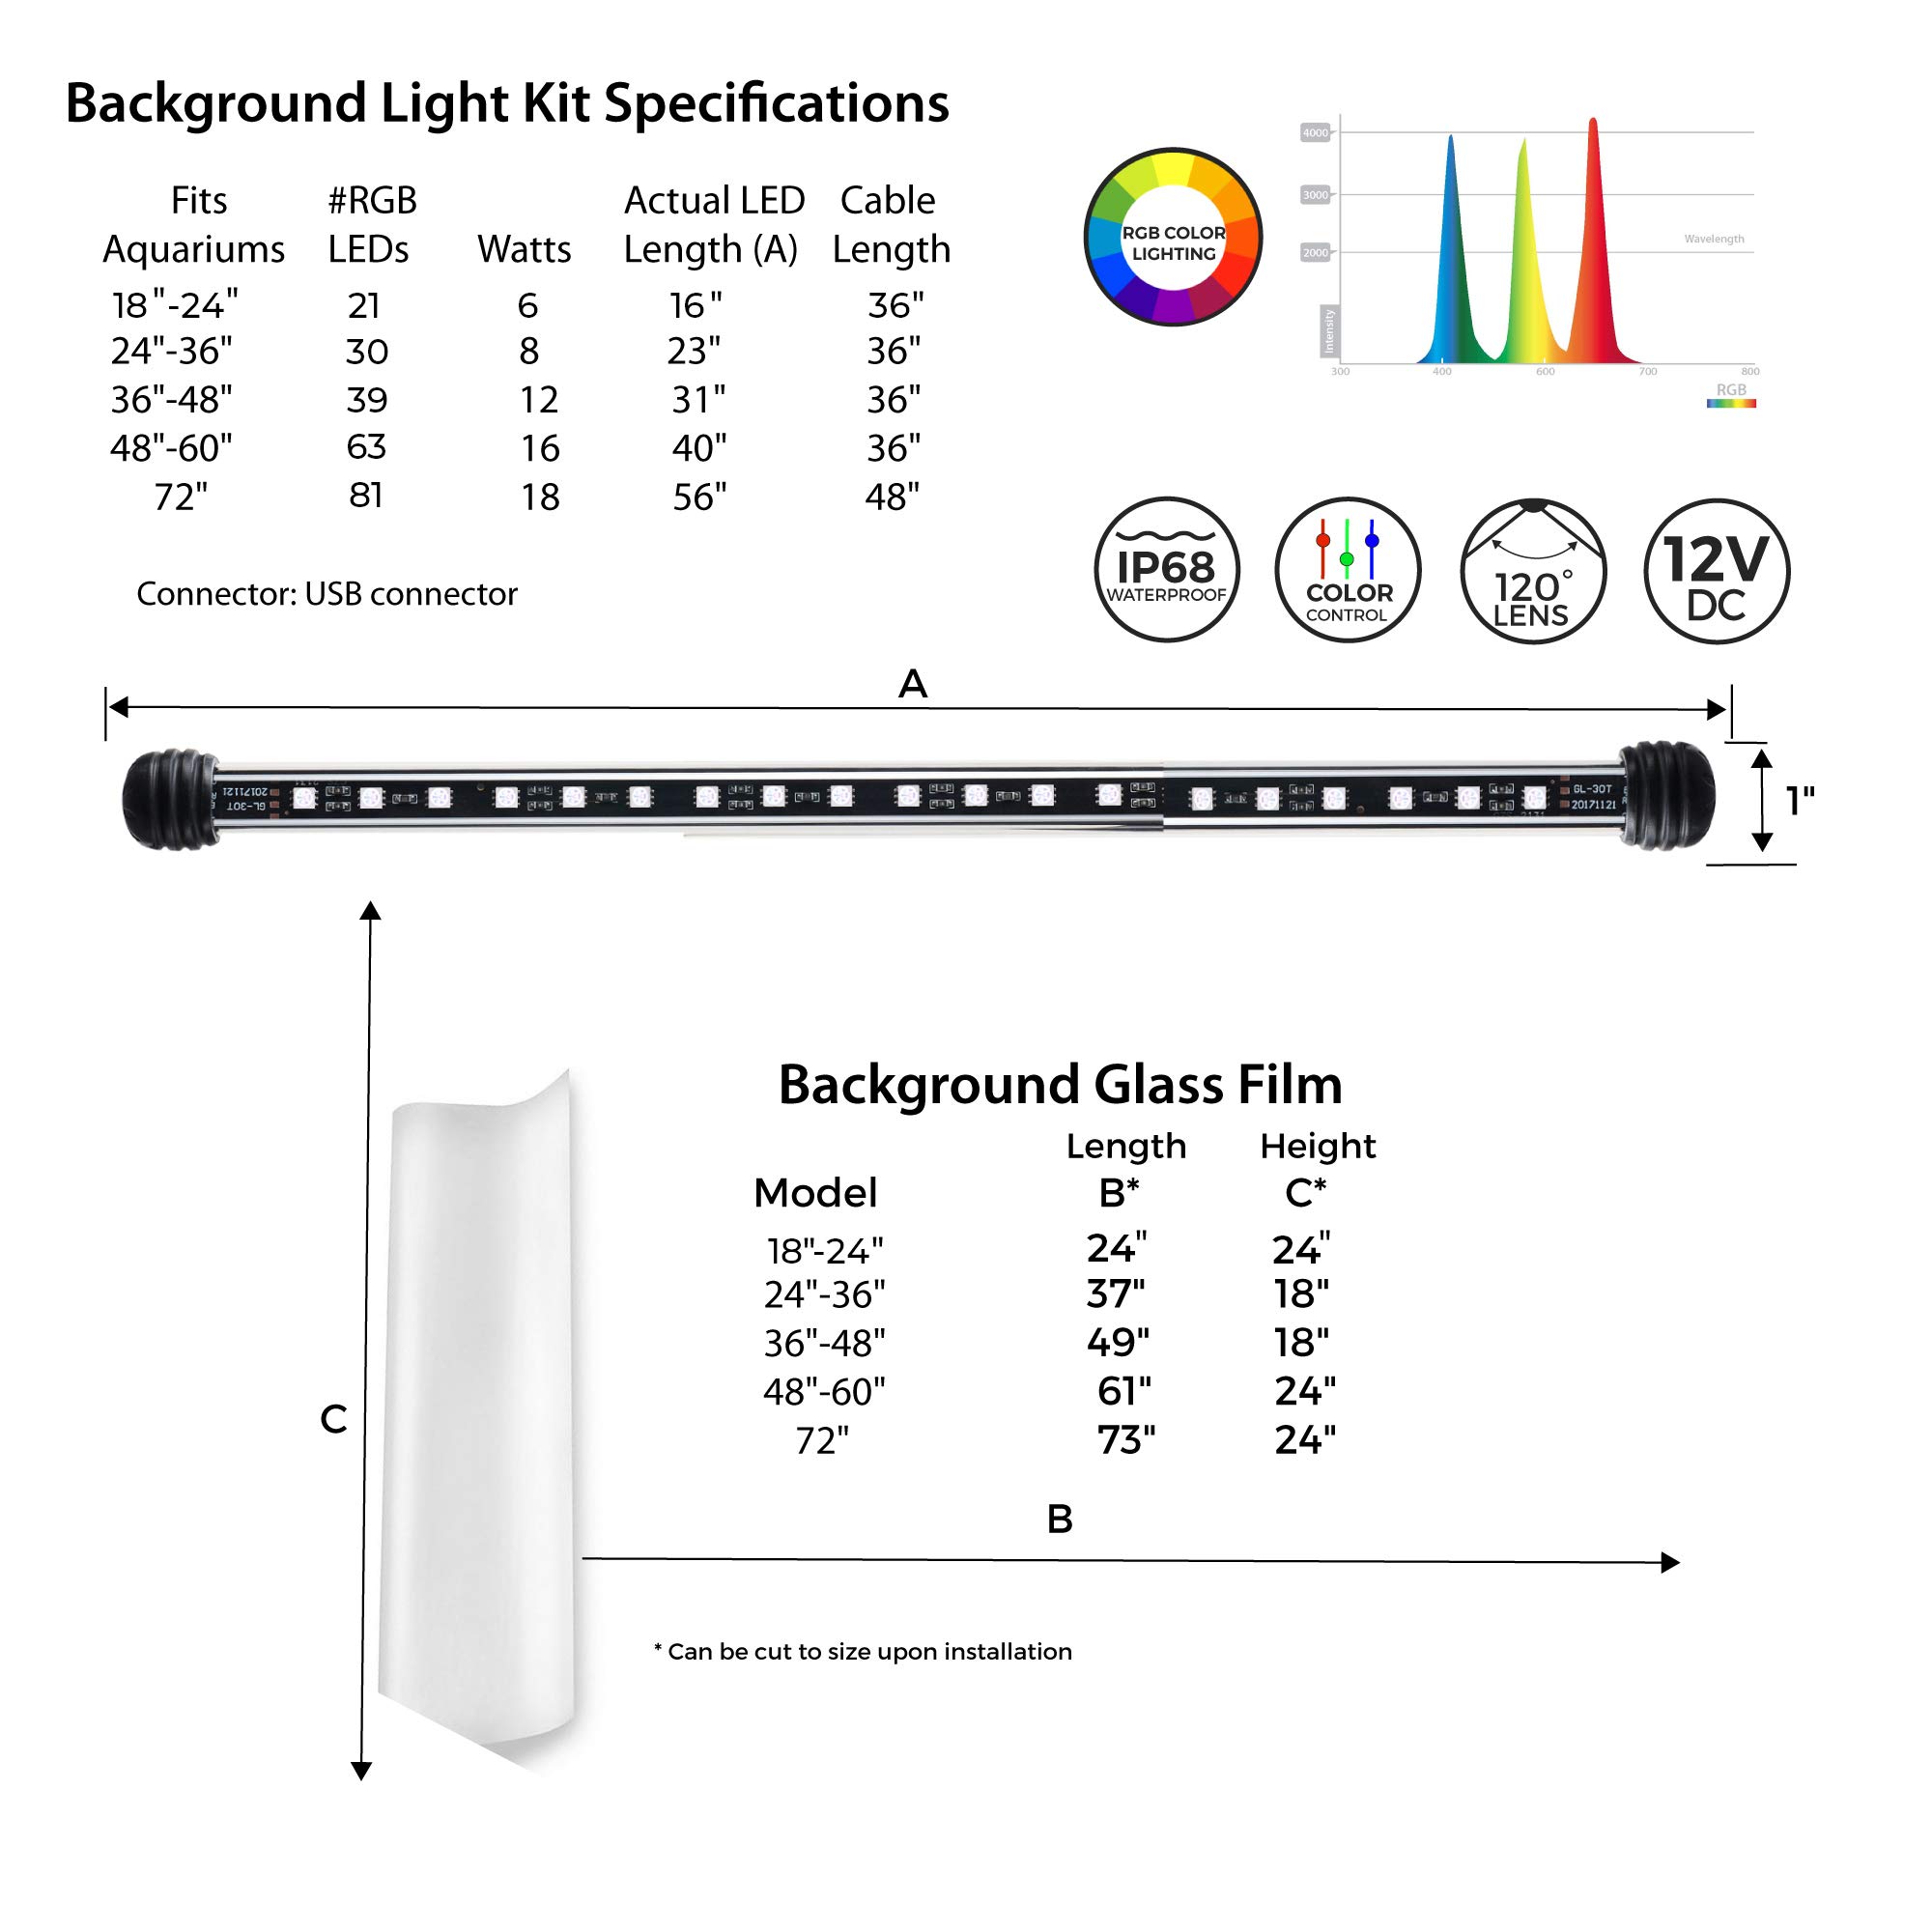 CURRENT USA Serene Add-on Accessory LED Background Light Kit | Includes Frosted Background Glass Film and RGB LED Light Strip | Fits Aquariums 48"-60" (Requires Serene Controller)